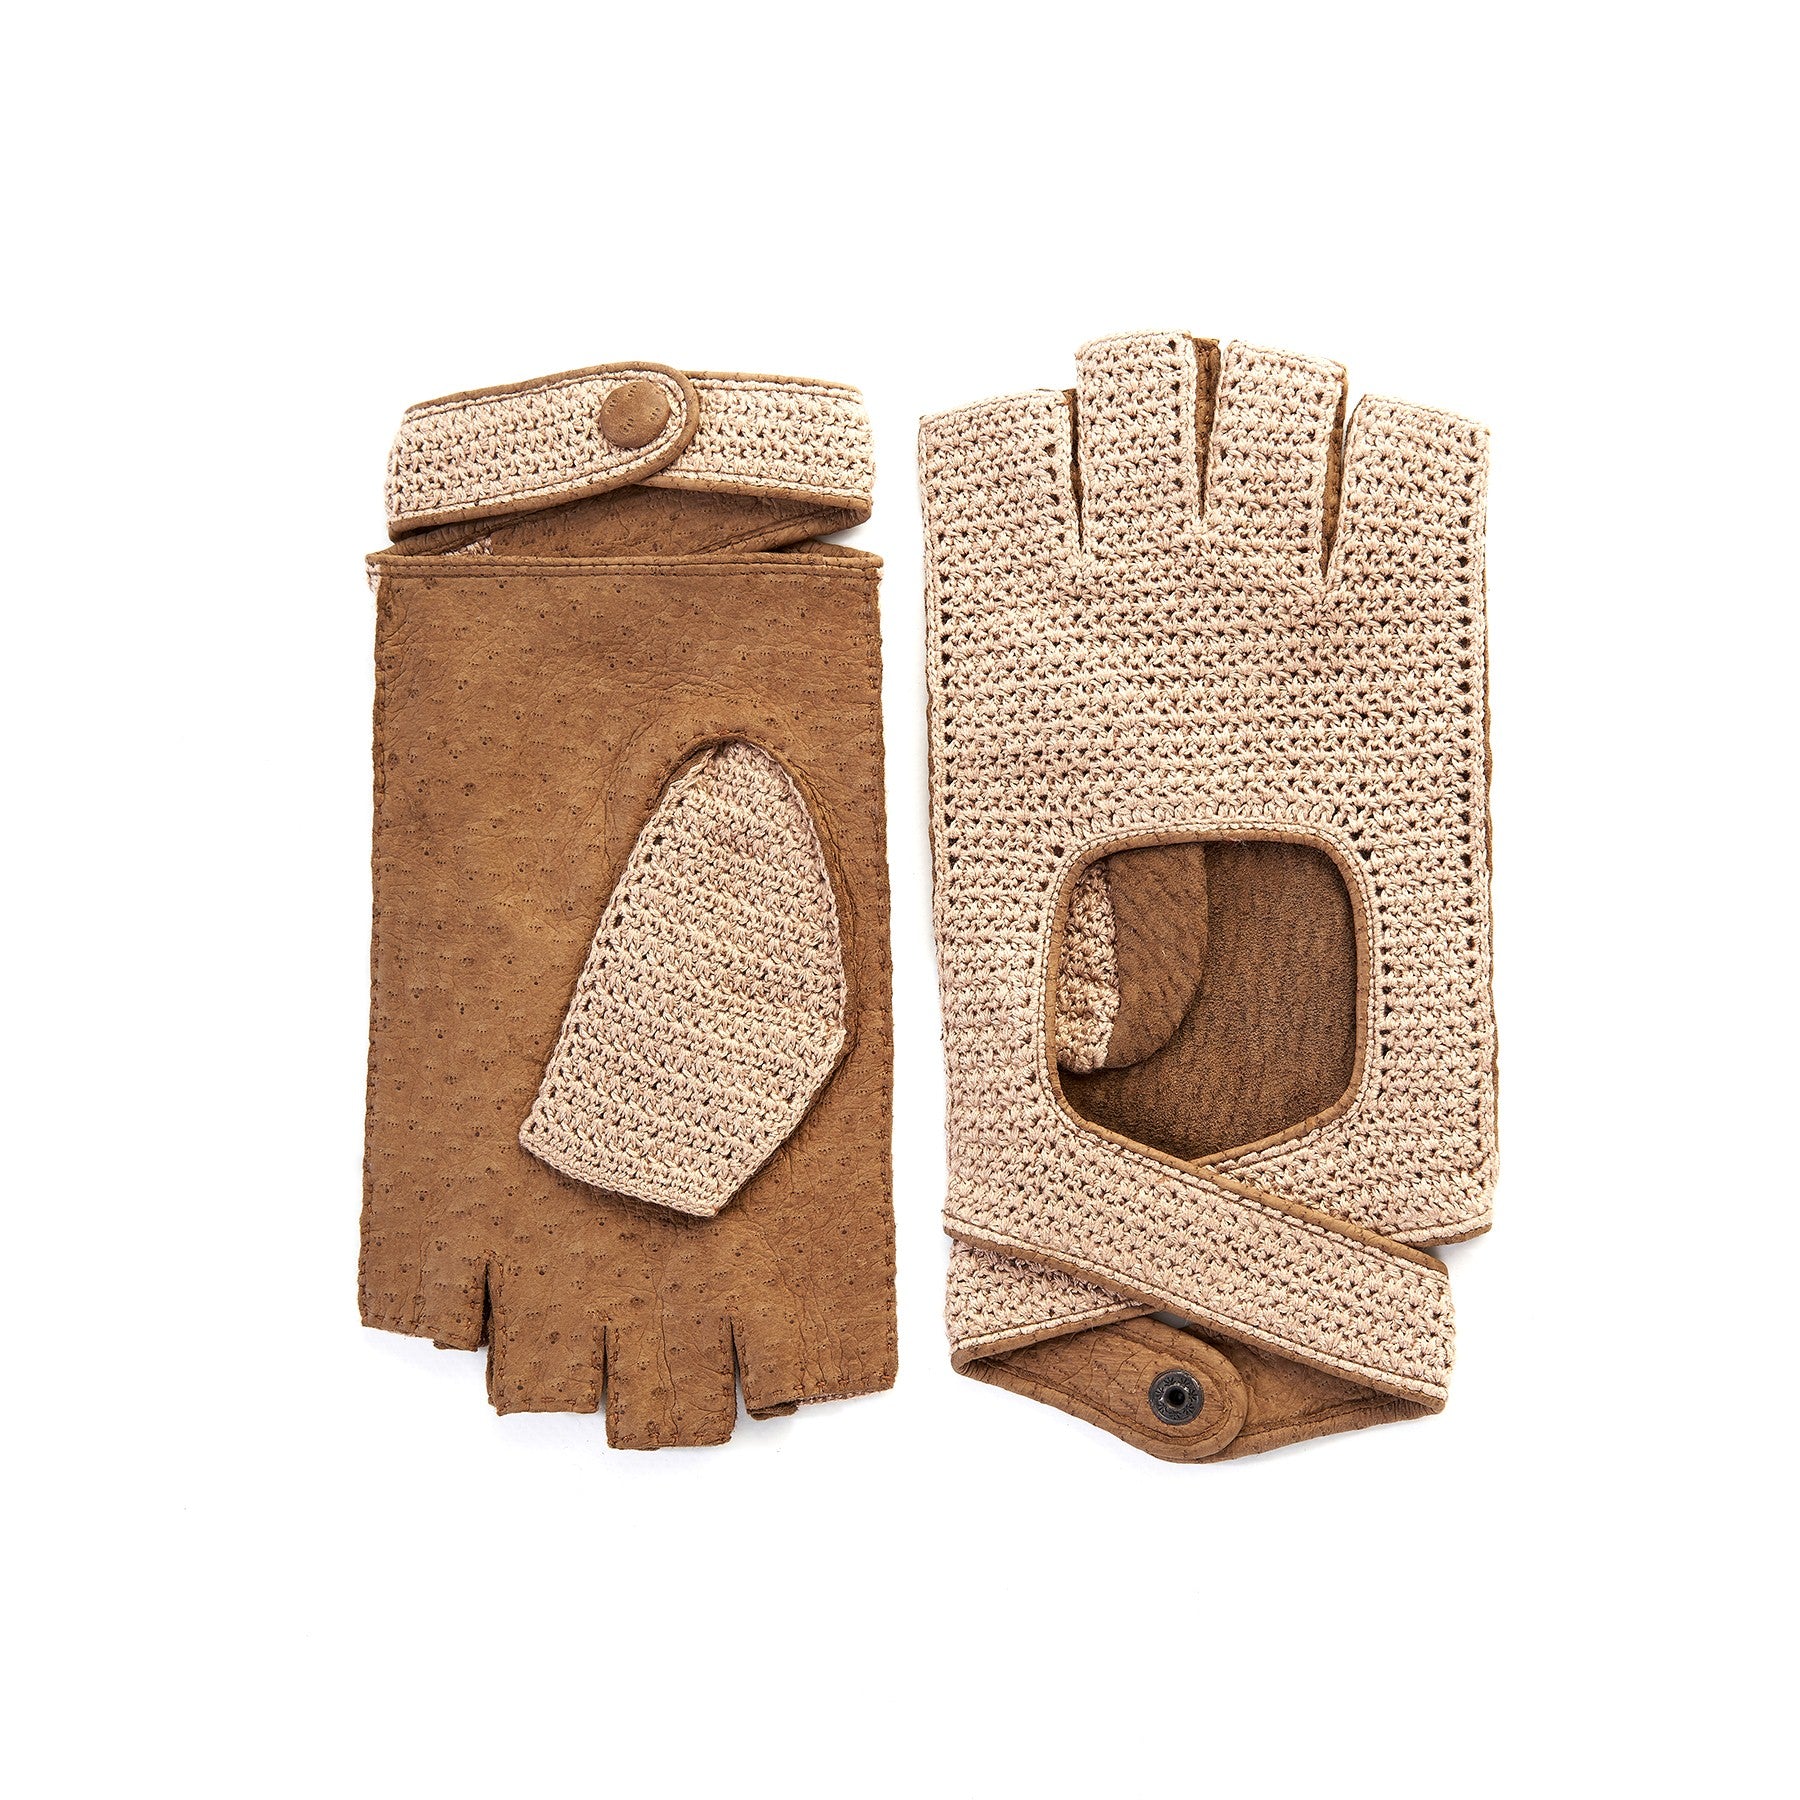 Men's peccary fingerless driving gloves with crochet top and strap detail